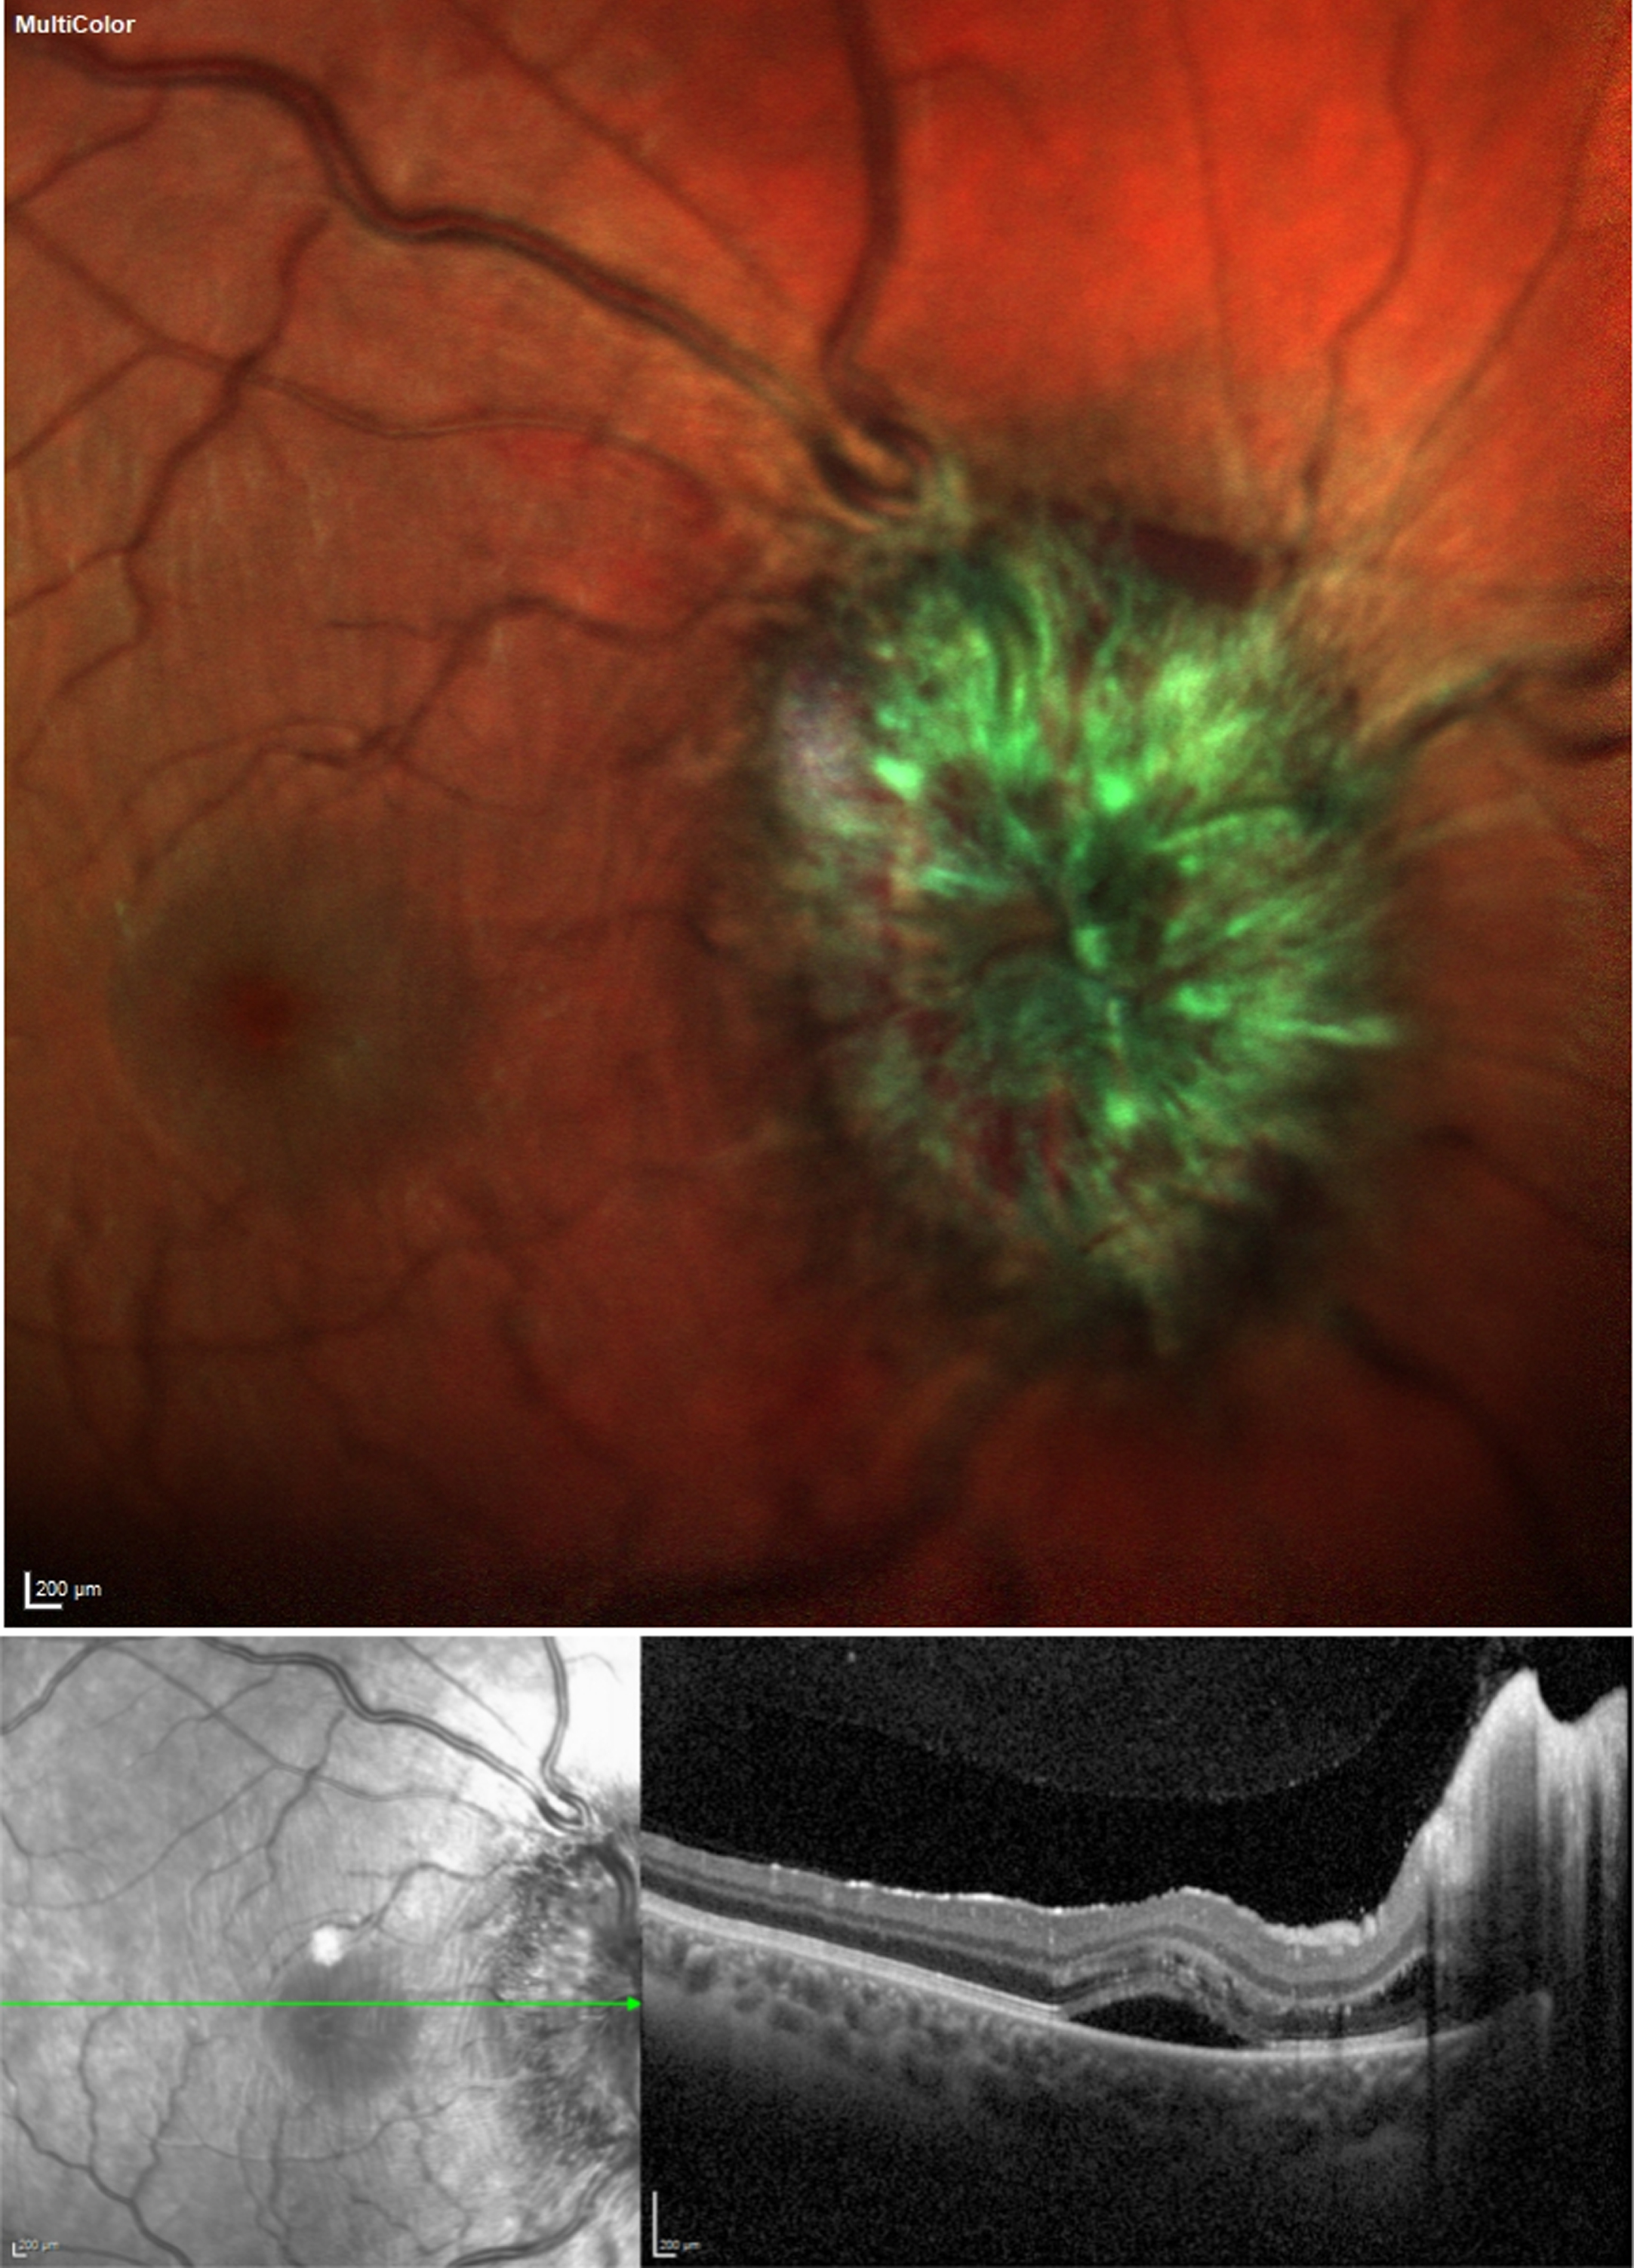 Multicolor imaging (color figure available in the electronic version) showing papilledema with hemorrhage and optical coherence tomography (OCT) showing papilledema with secondary macular edema. Written permission to publish these images was granted by the patient.